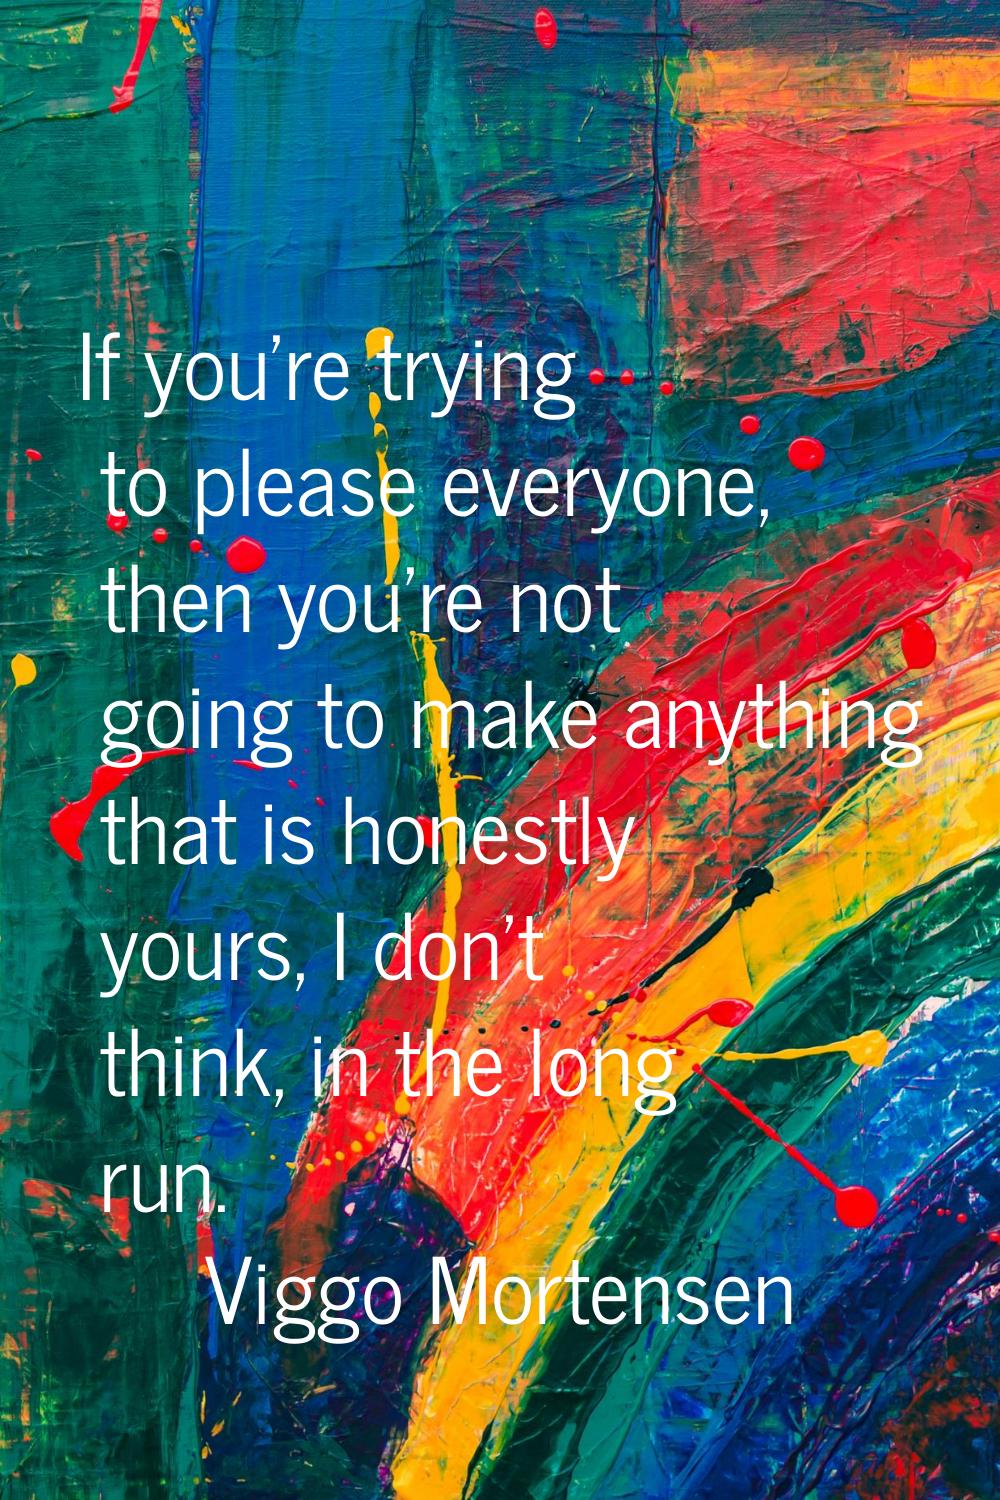 If you're trying to please everyone, then you're not going to make anything that is honestly yours,